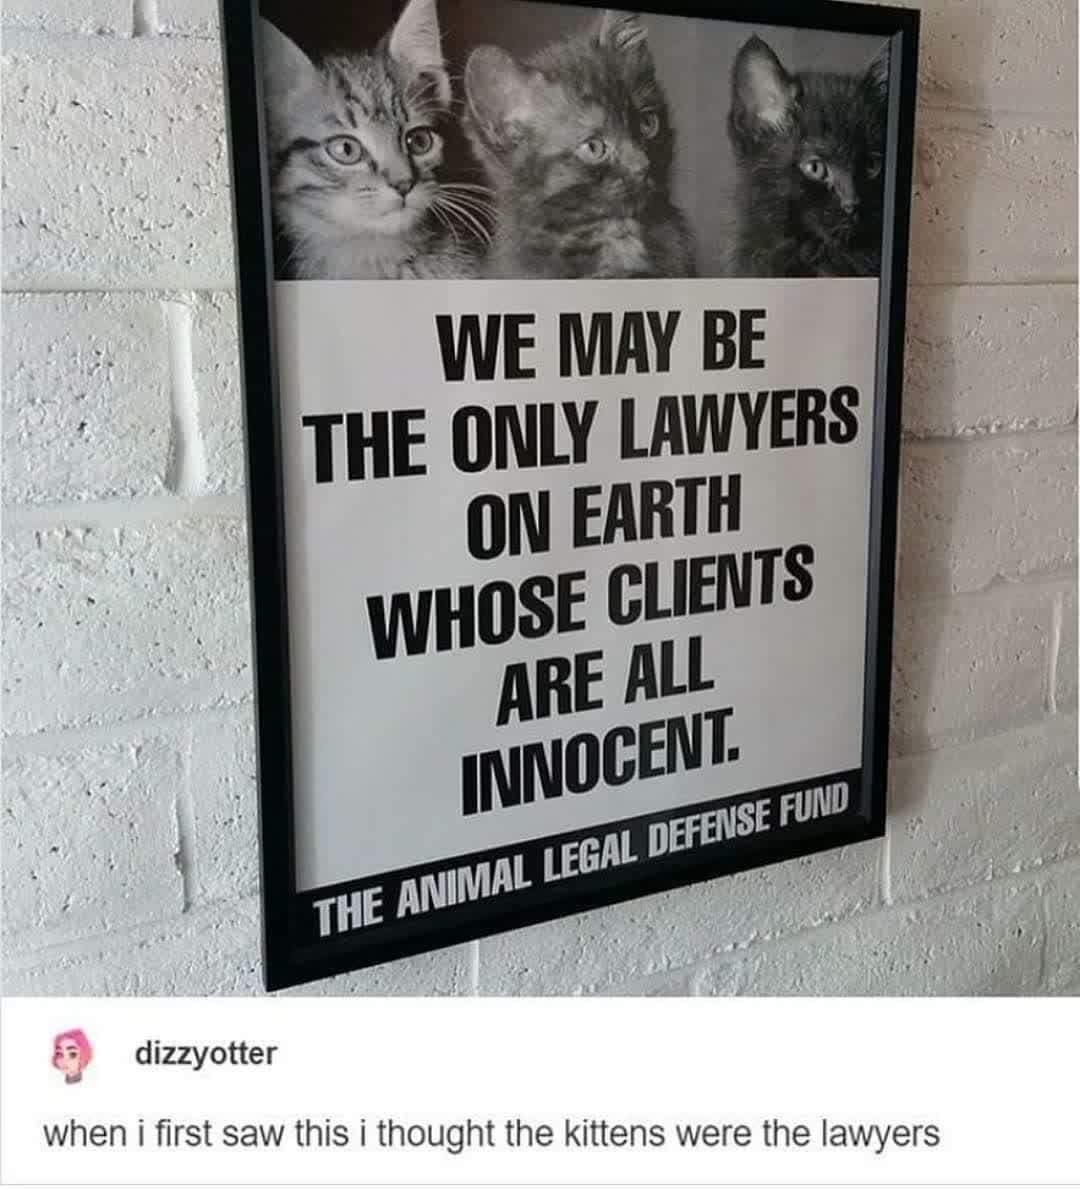 we may be the only lawyers on earth whose clients are all innocent - We May Be The Only Lawyers On Earth Whose Clients Are All Innocent. The Animal Legal Defense Fund dizzyotter when i first saw this i thought the kittens were the lawyers